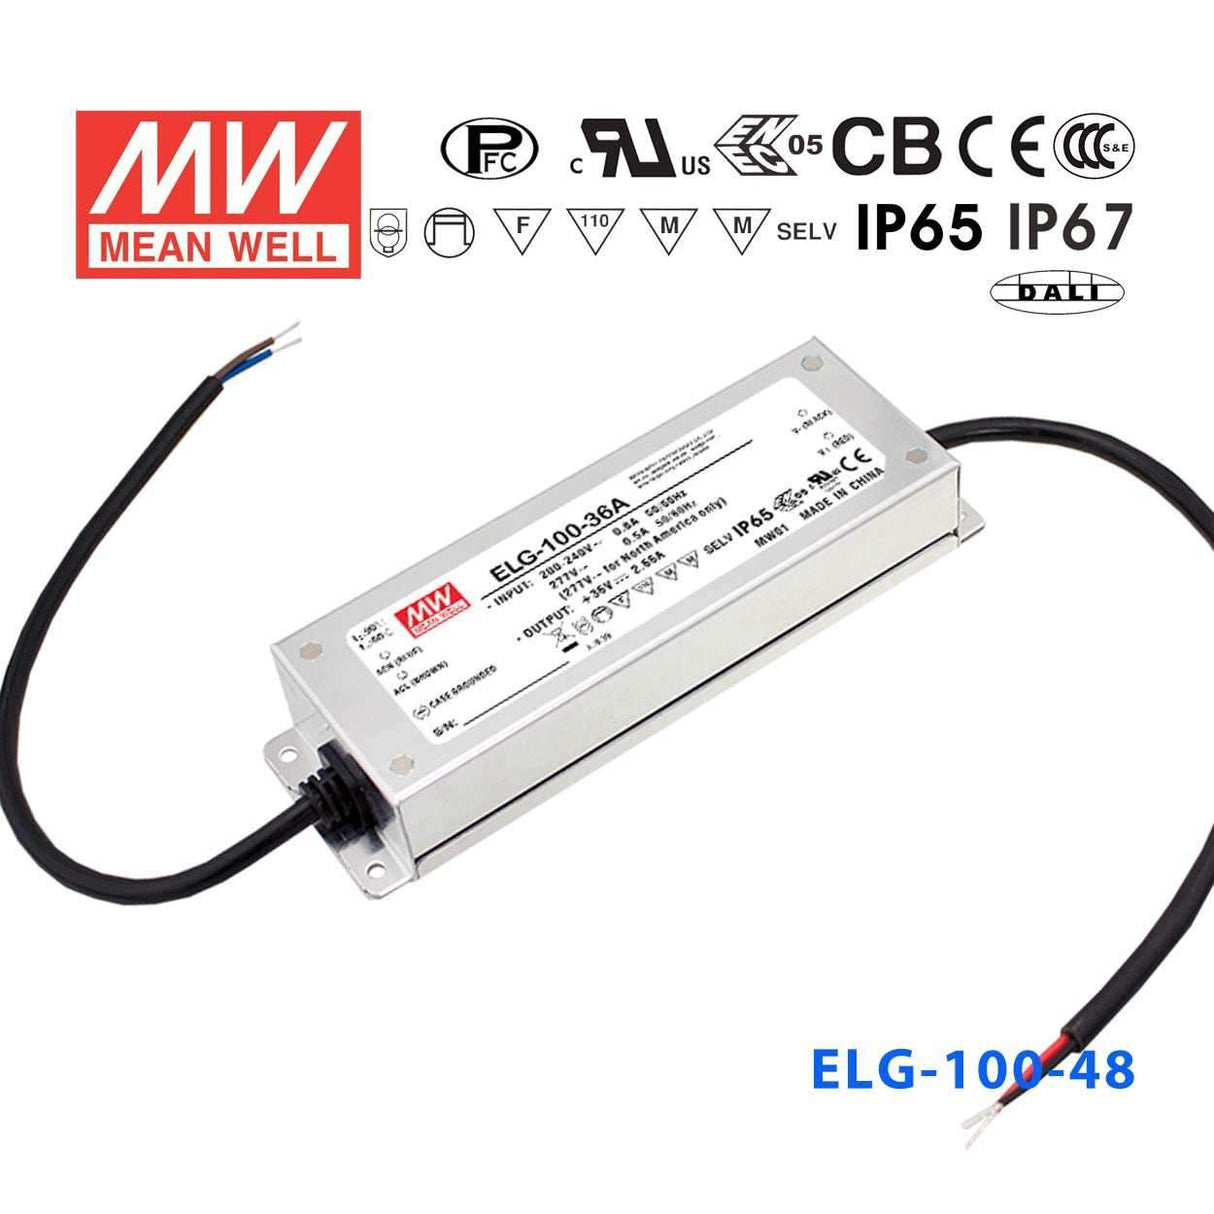 Mean Well ELG-100-48A Power Supply 96W 48V - Adjustable